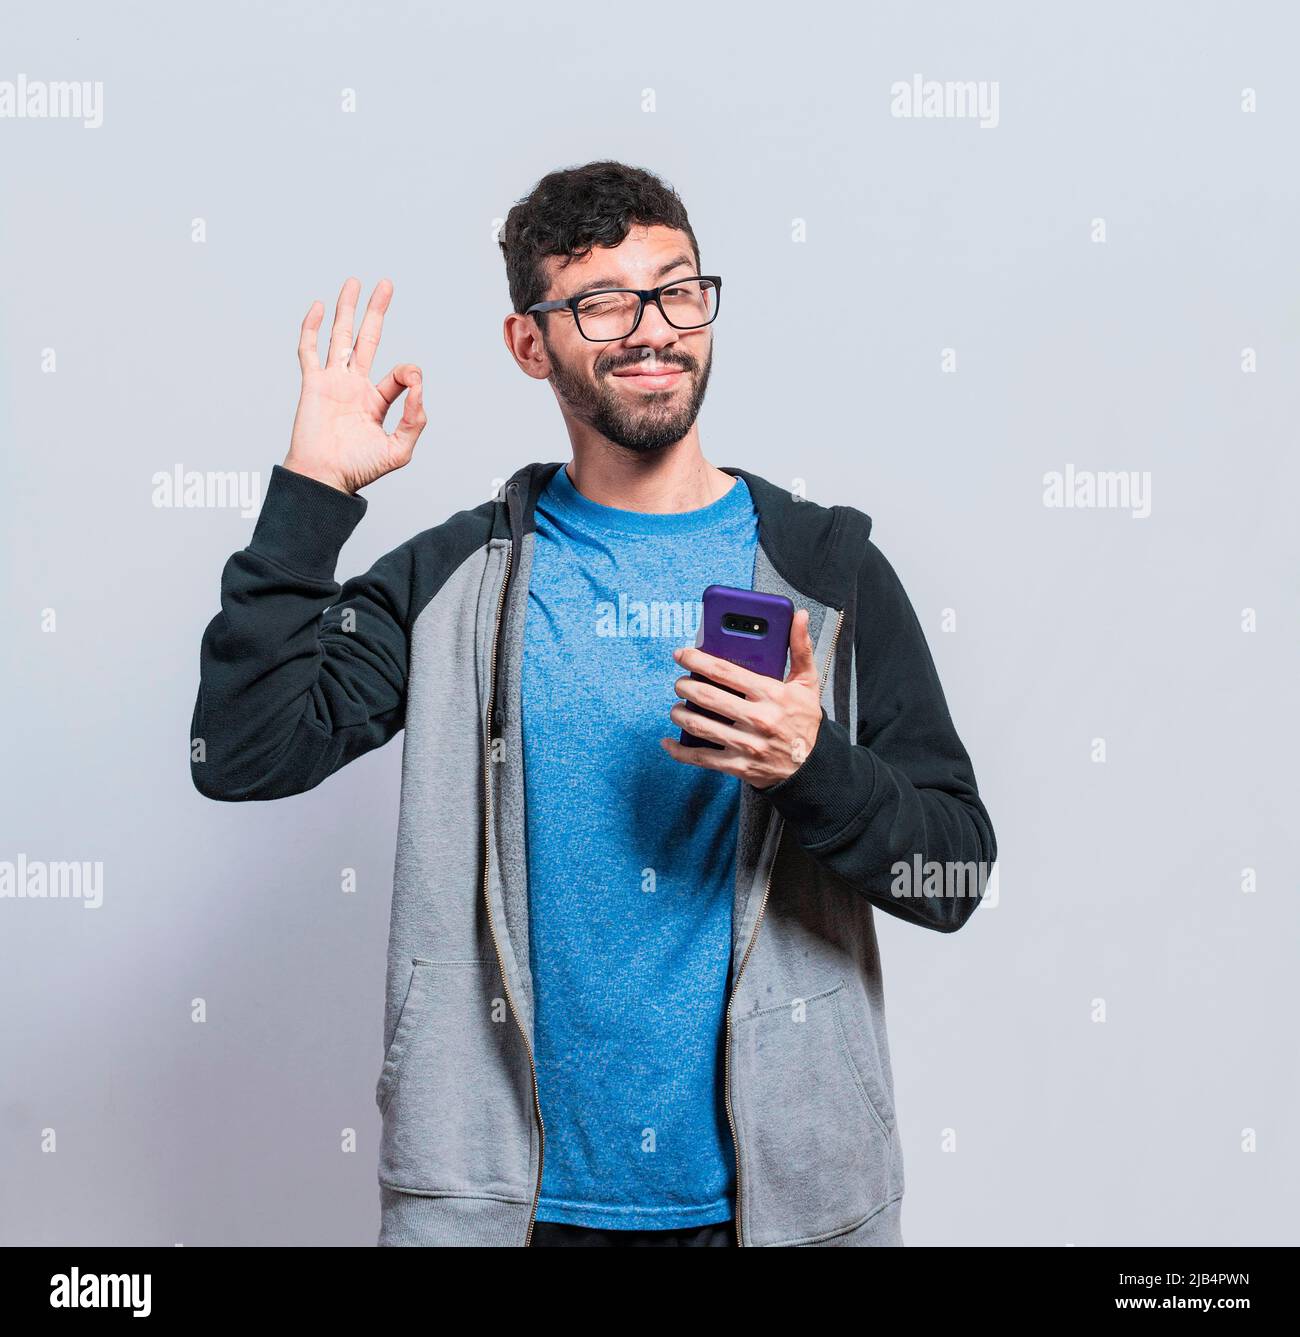 Pleasant person holding cellphone and winking, smiling boy with cellphone making ok sign, concept of positive person with cellphone closing fingers Stock Photo